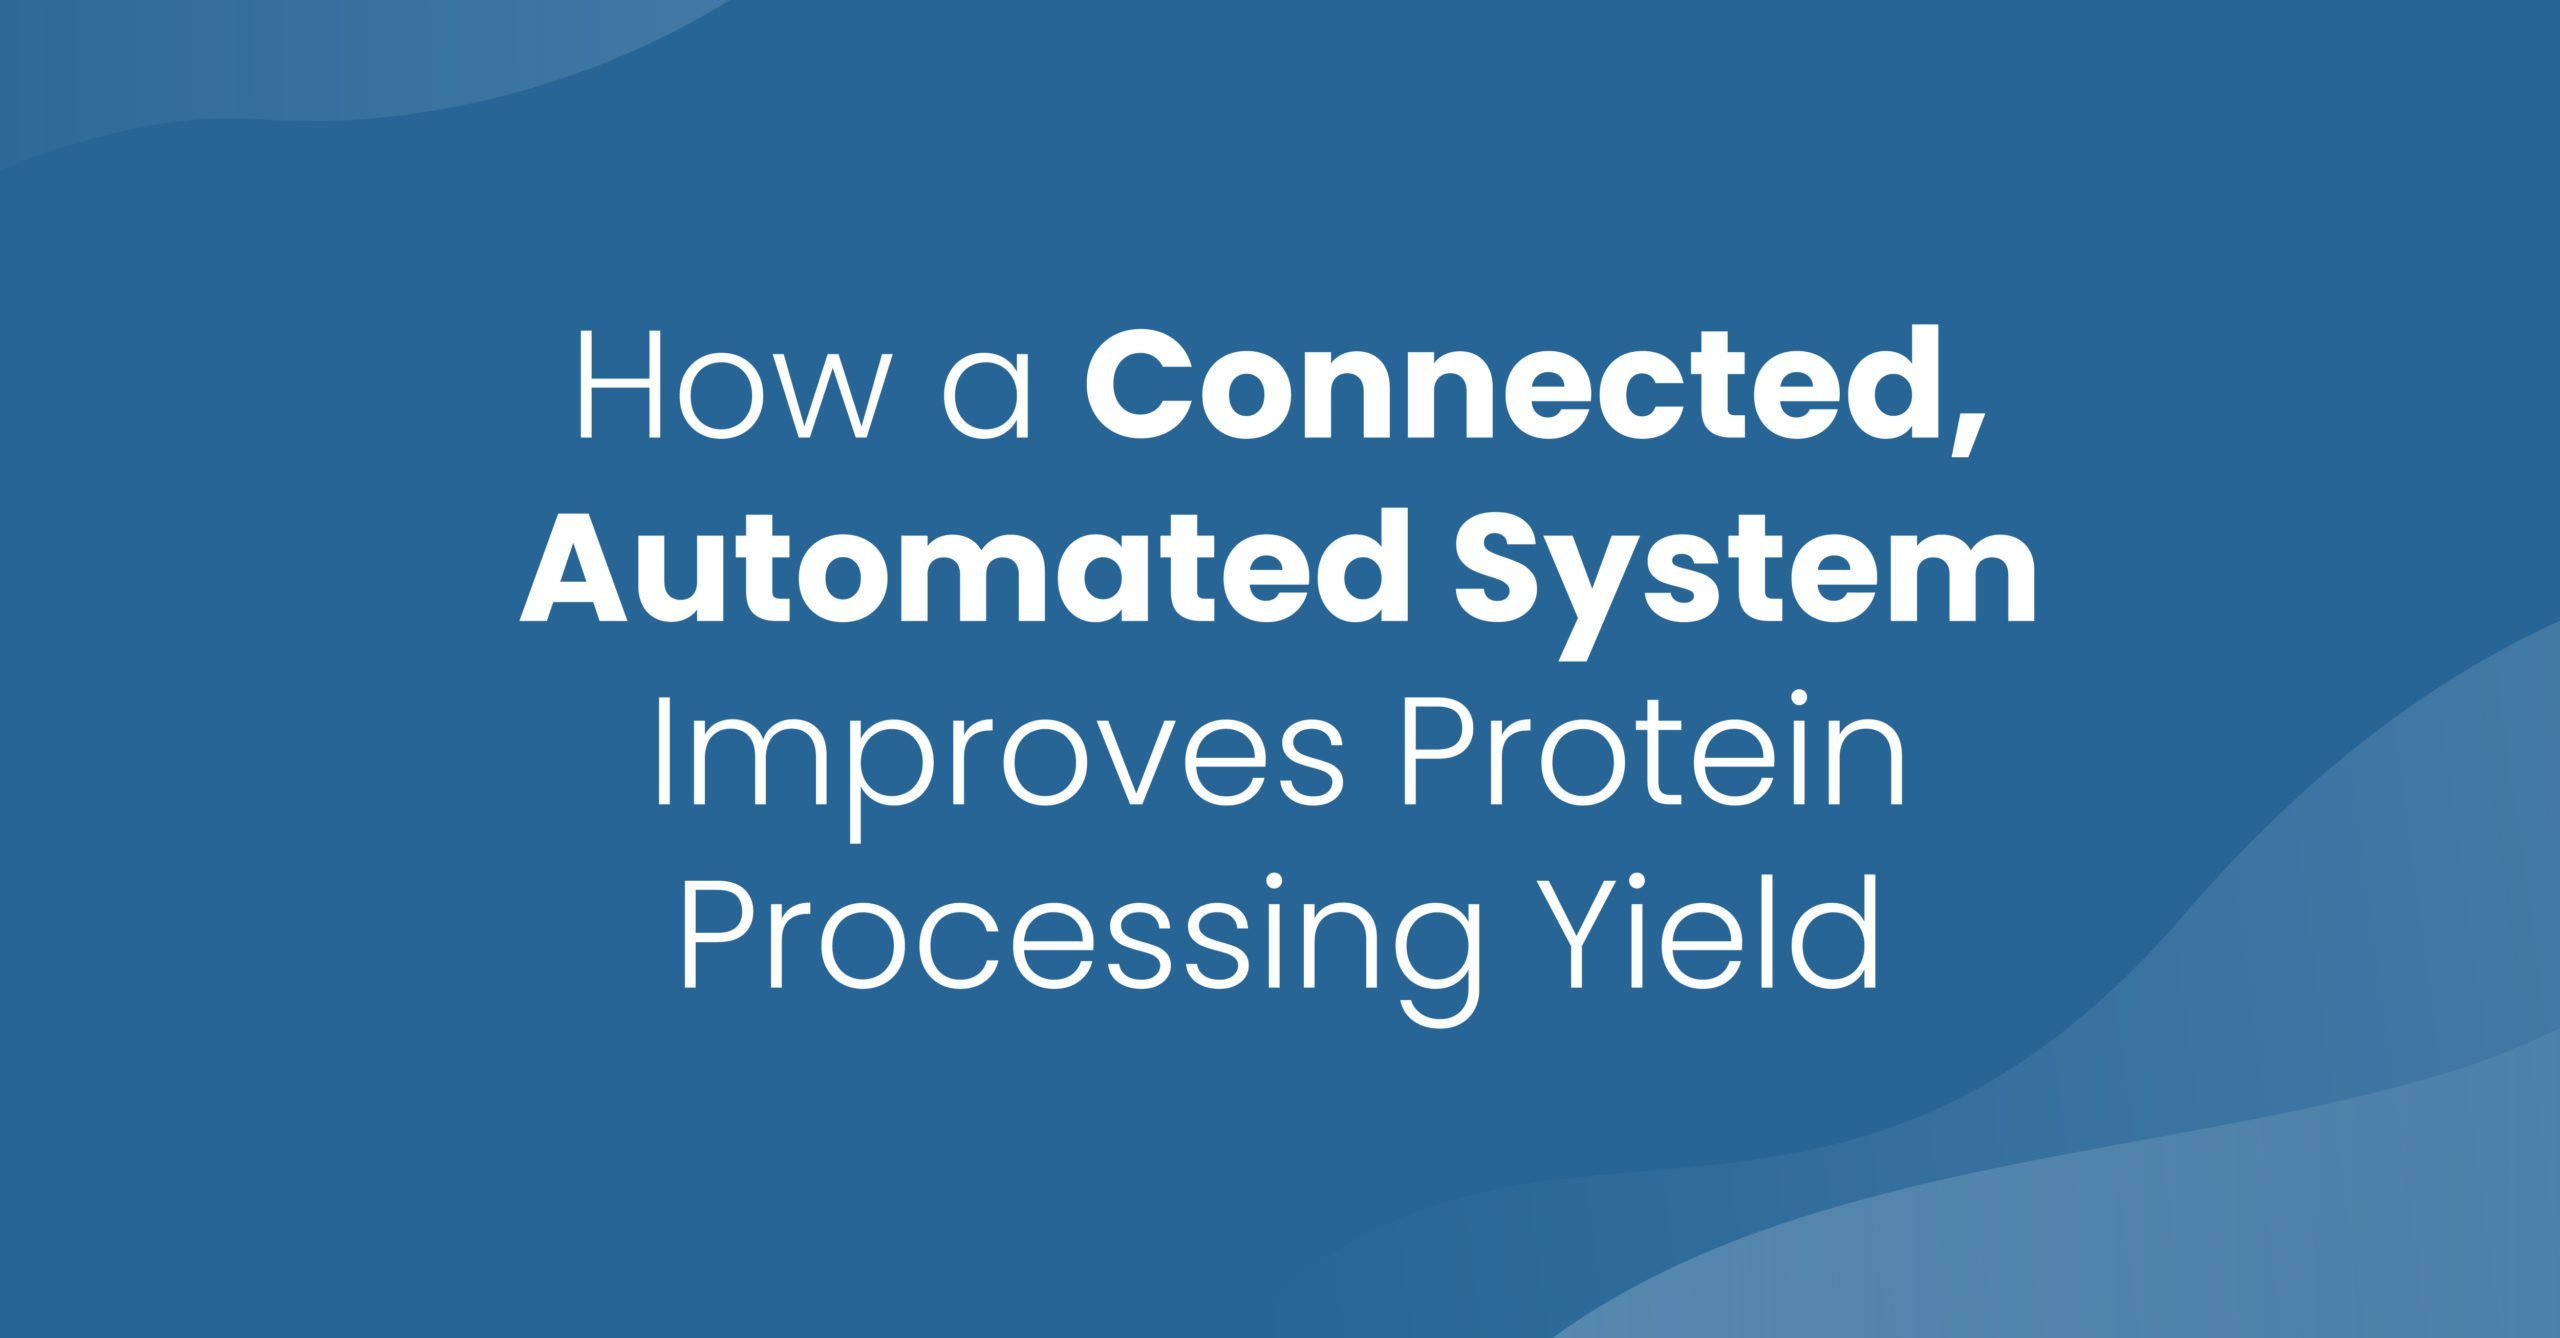 Text over a blue wavy background that says, "How a Connected Automated System Improves Protein Processing Yield"